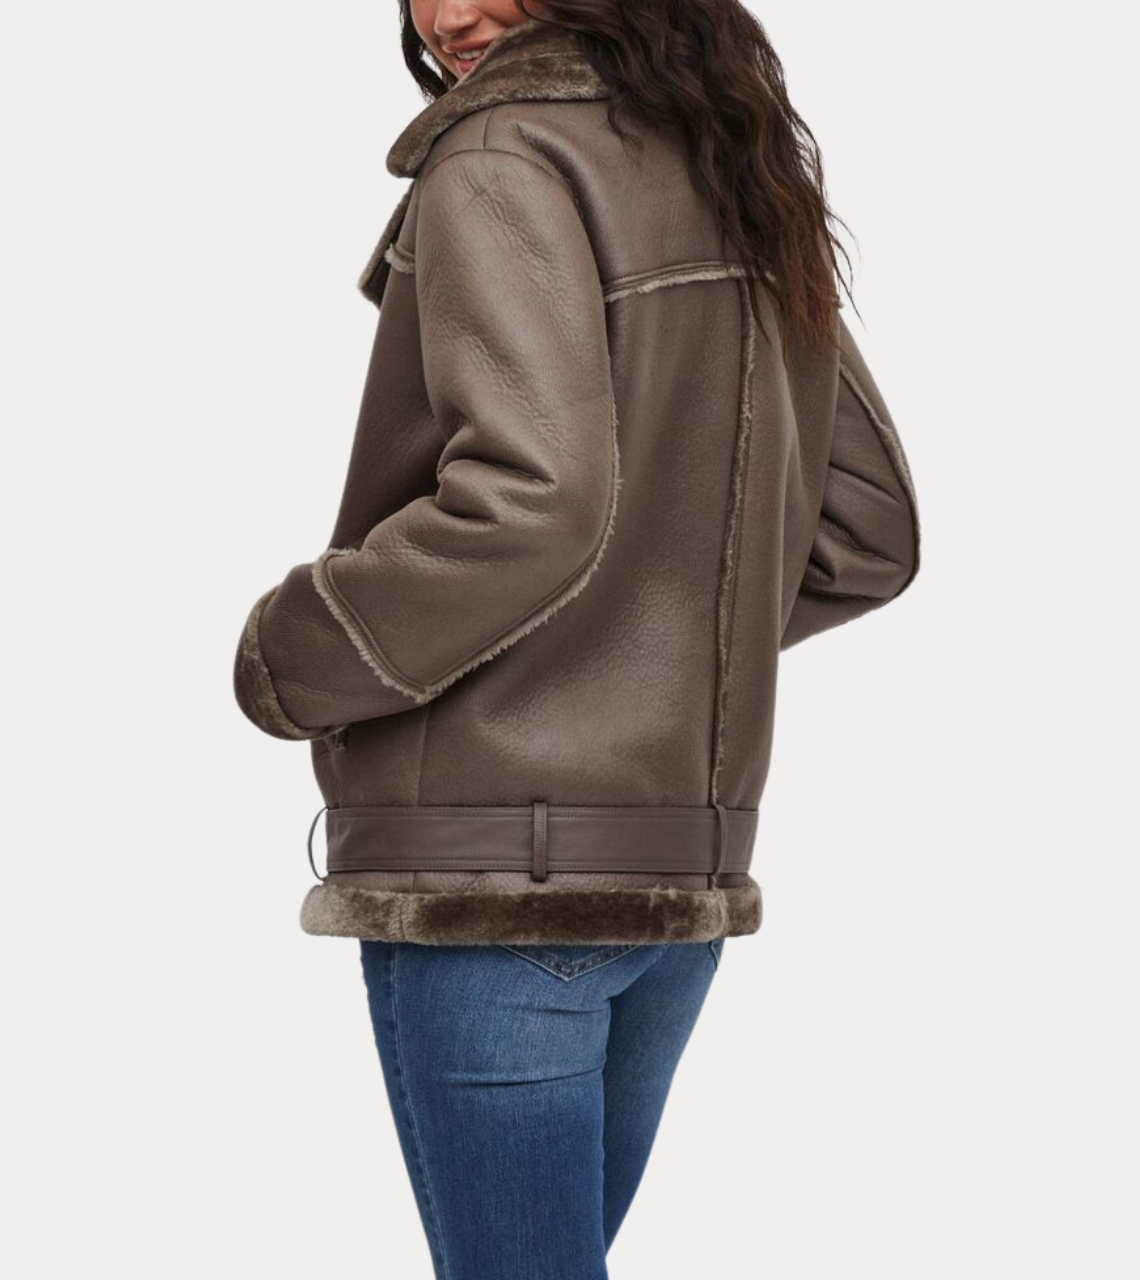  Women's B3 Brown Shearling Leather Jacket  Back